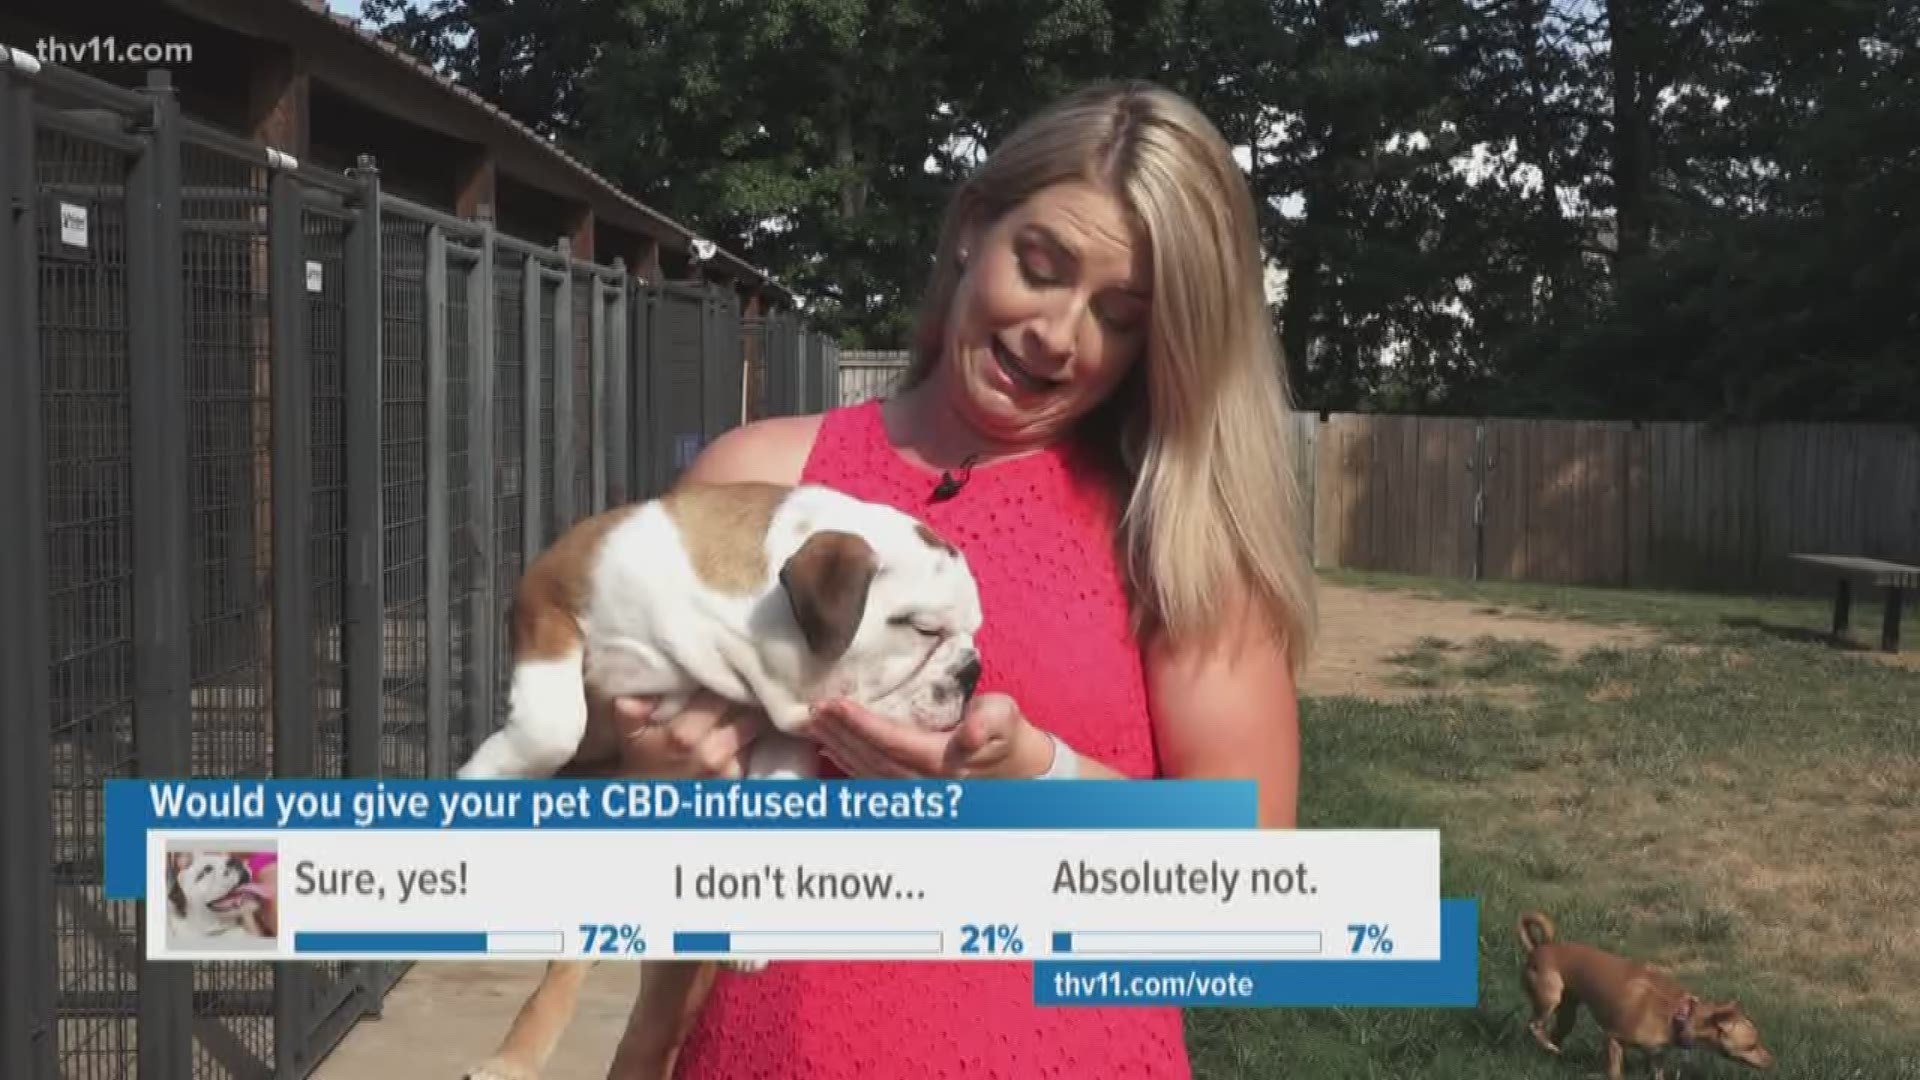 CBD-based treats could help pets with stress, anxiety